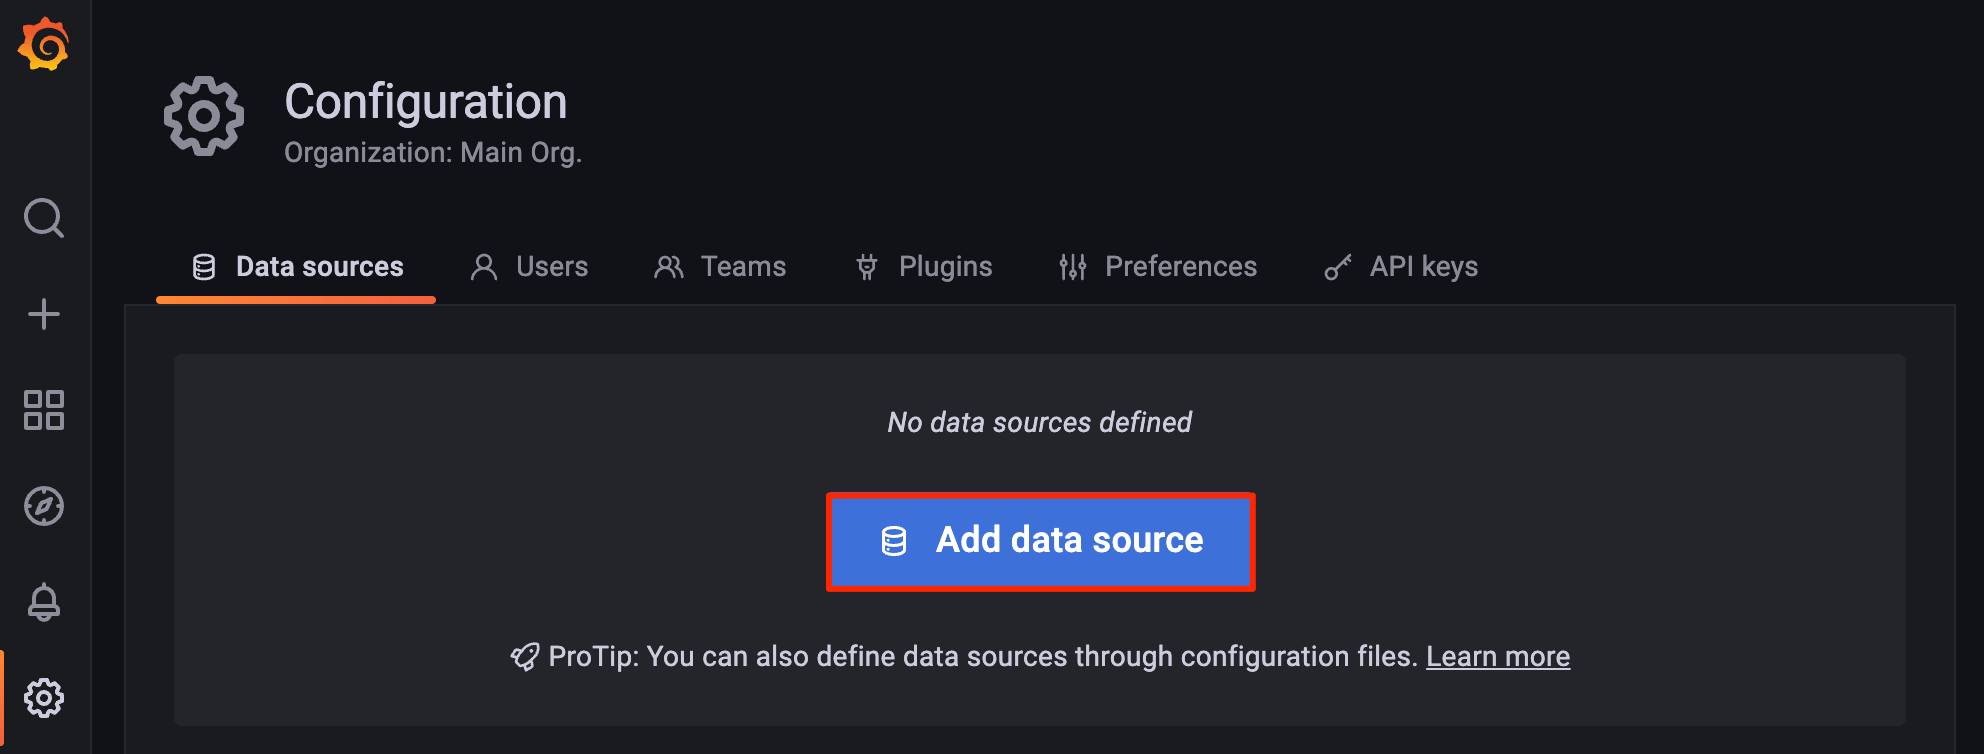 Screenshot of the Data sources page